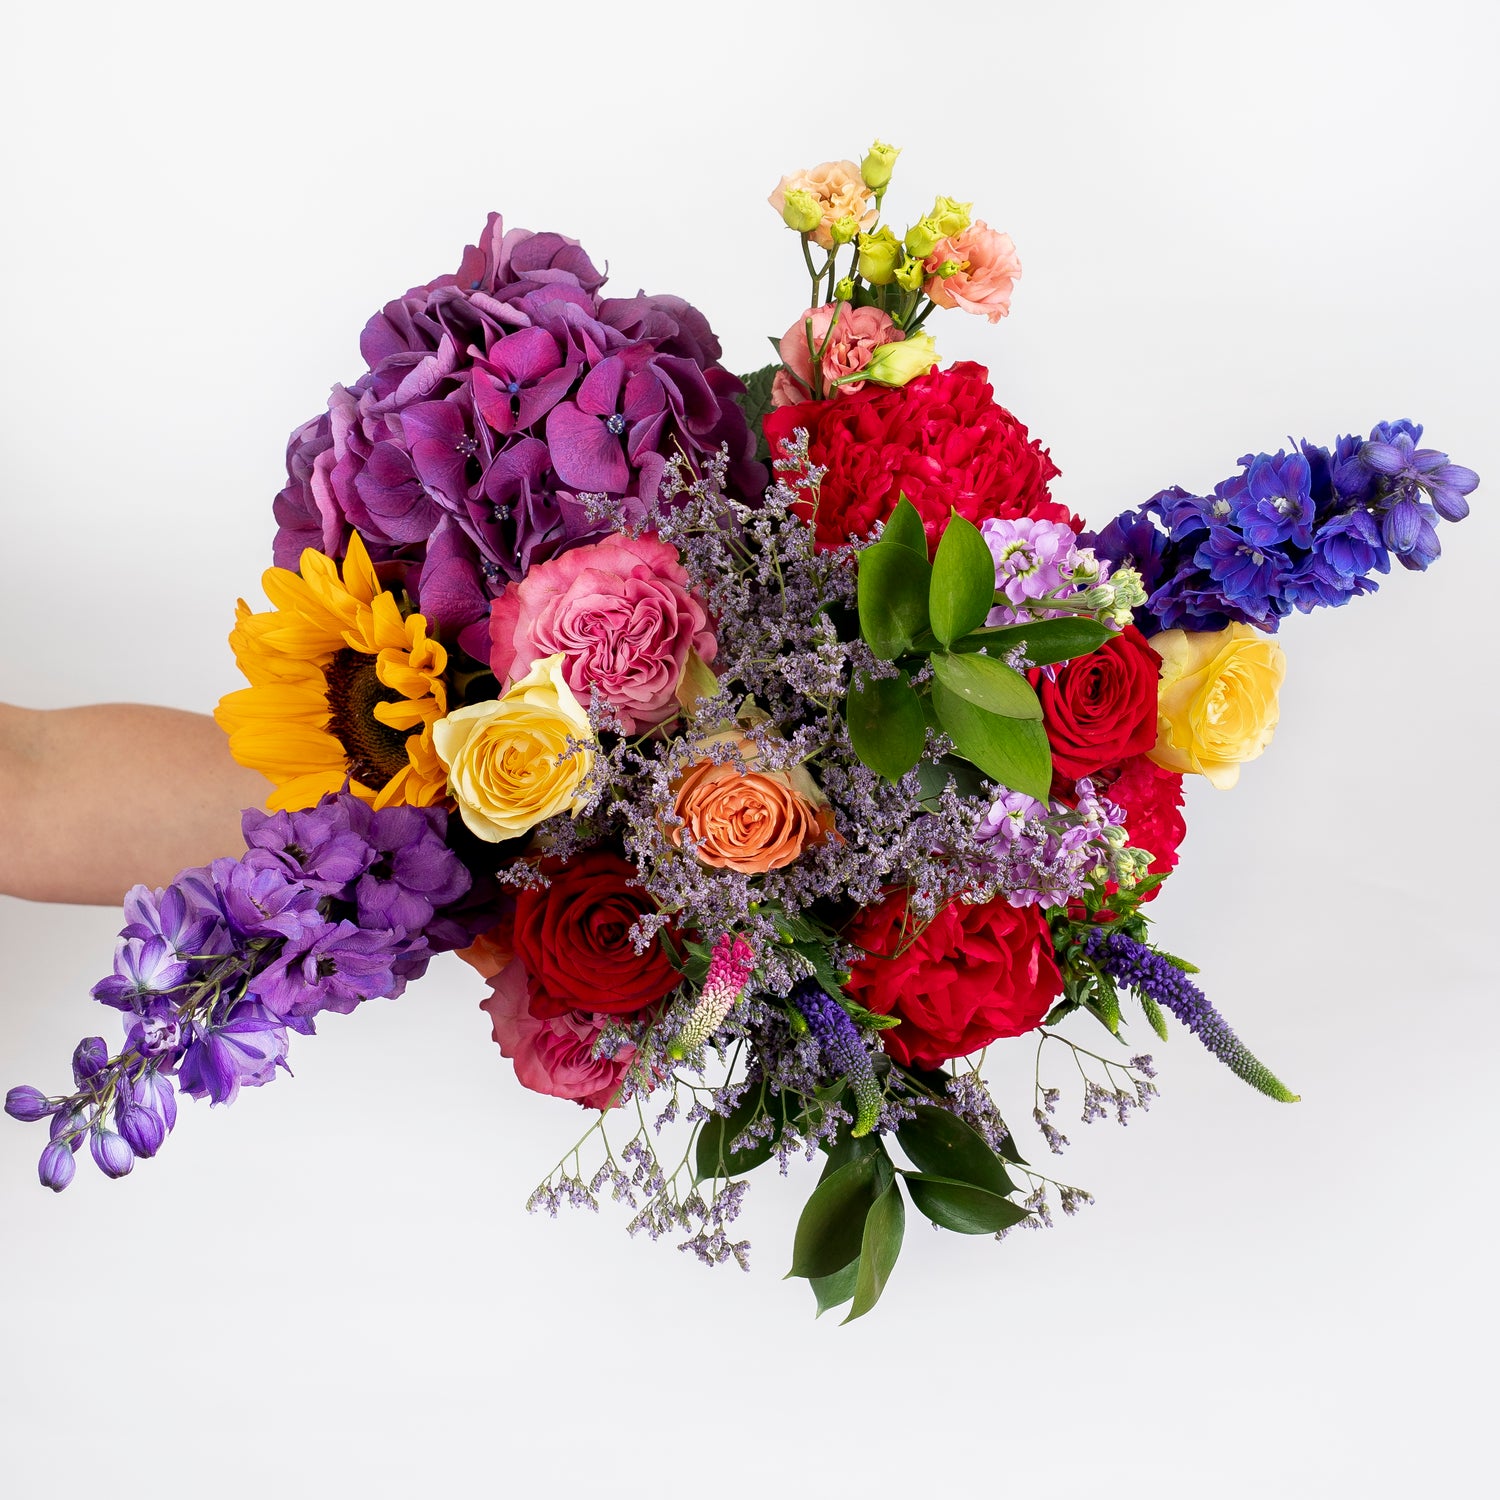 The Benefits of a Corporate Flower Subscription Service